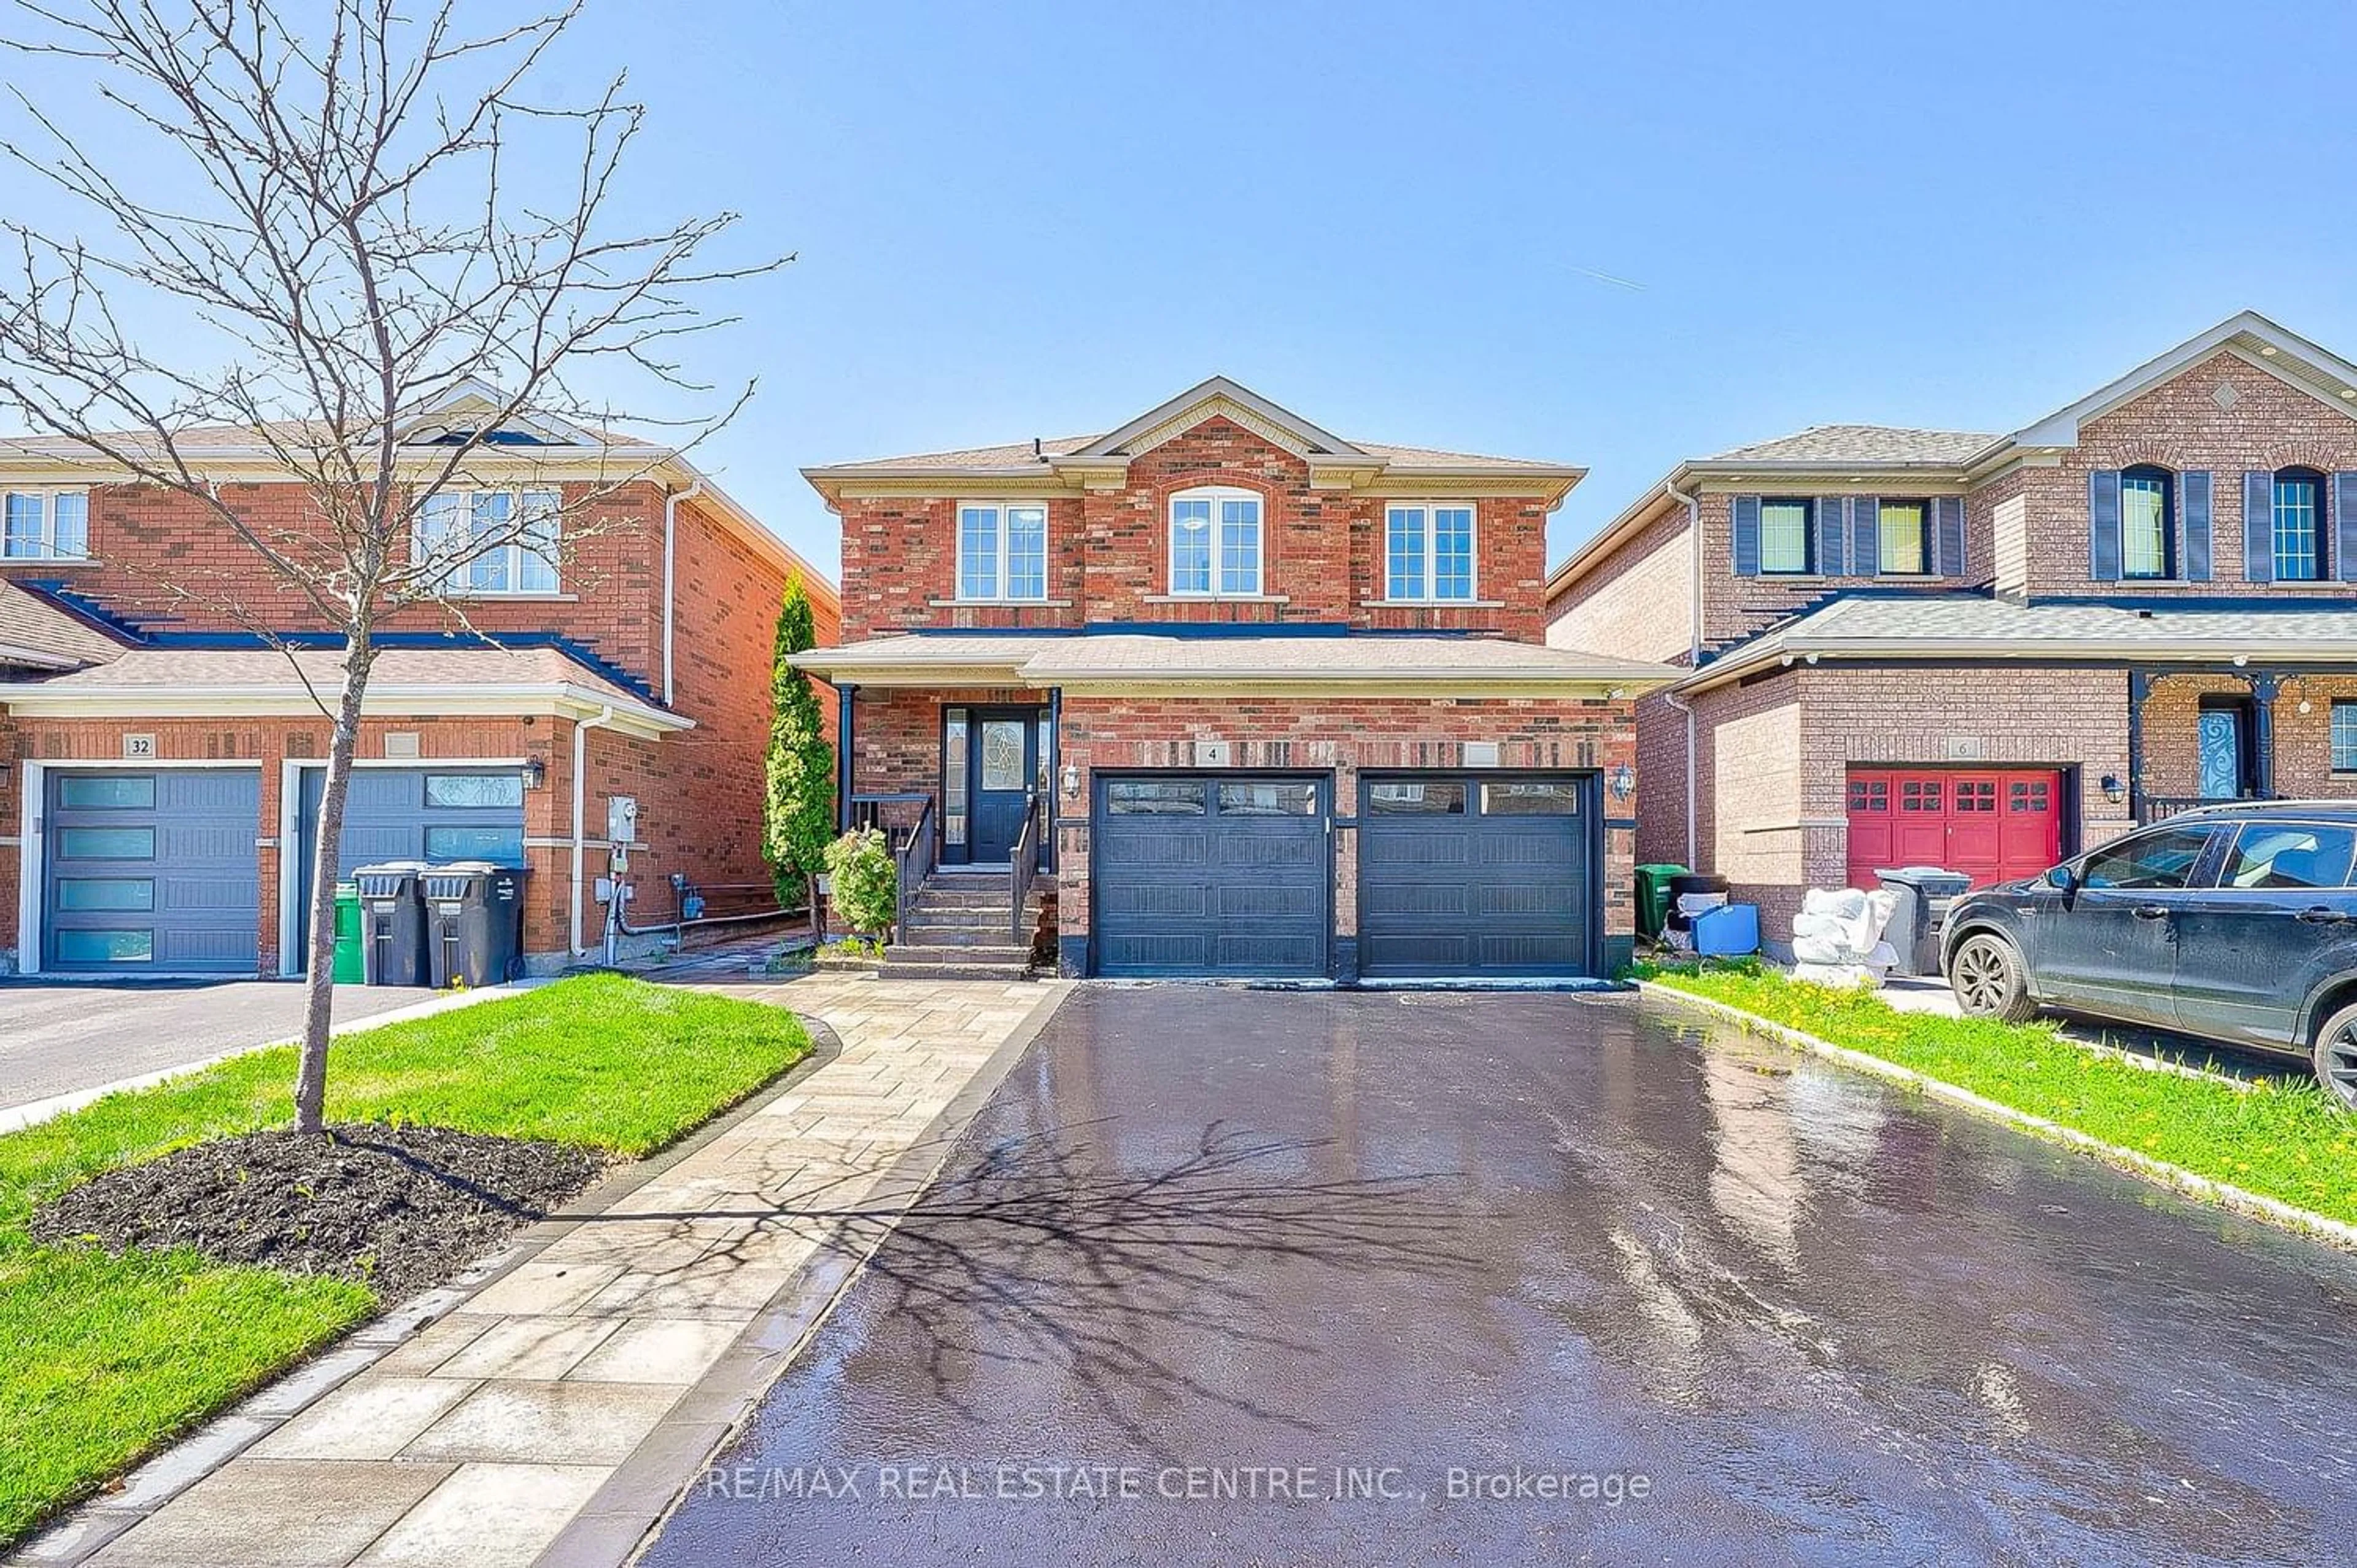 Home with brick exterior material for 4 Hedgeline St, Brampton Ontario L7A 2Z4